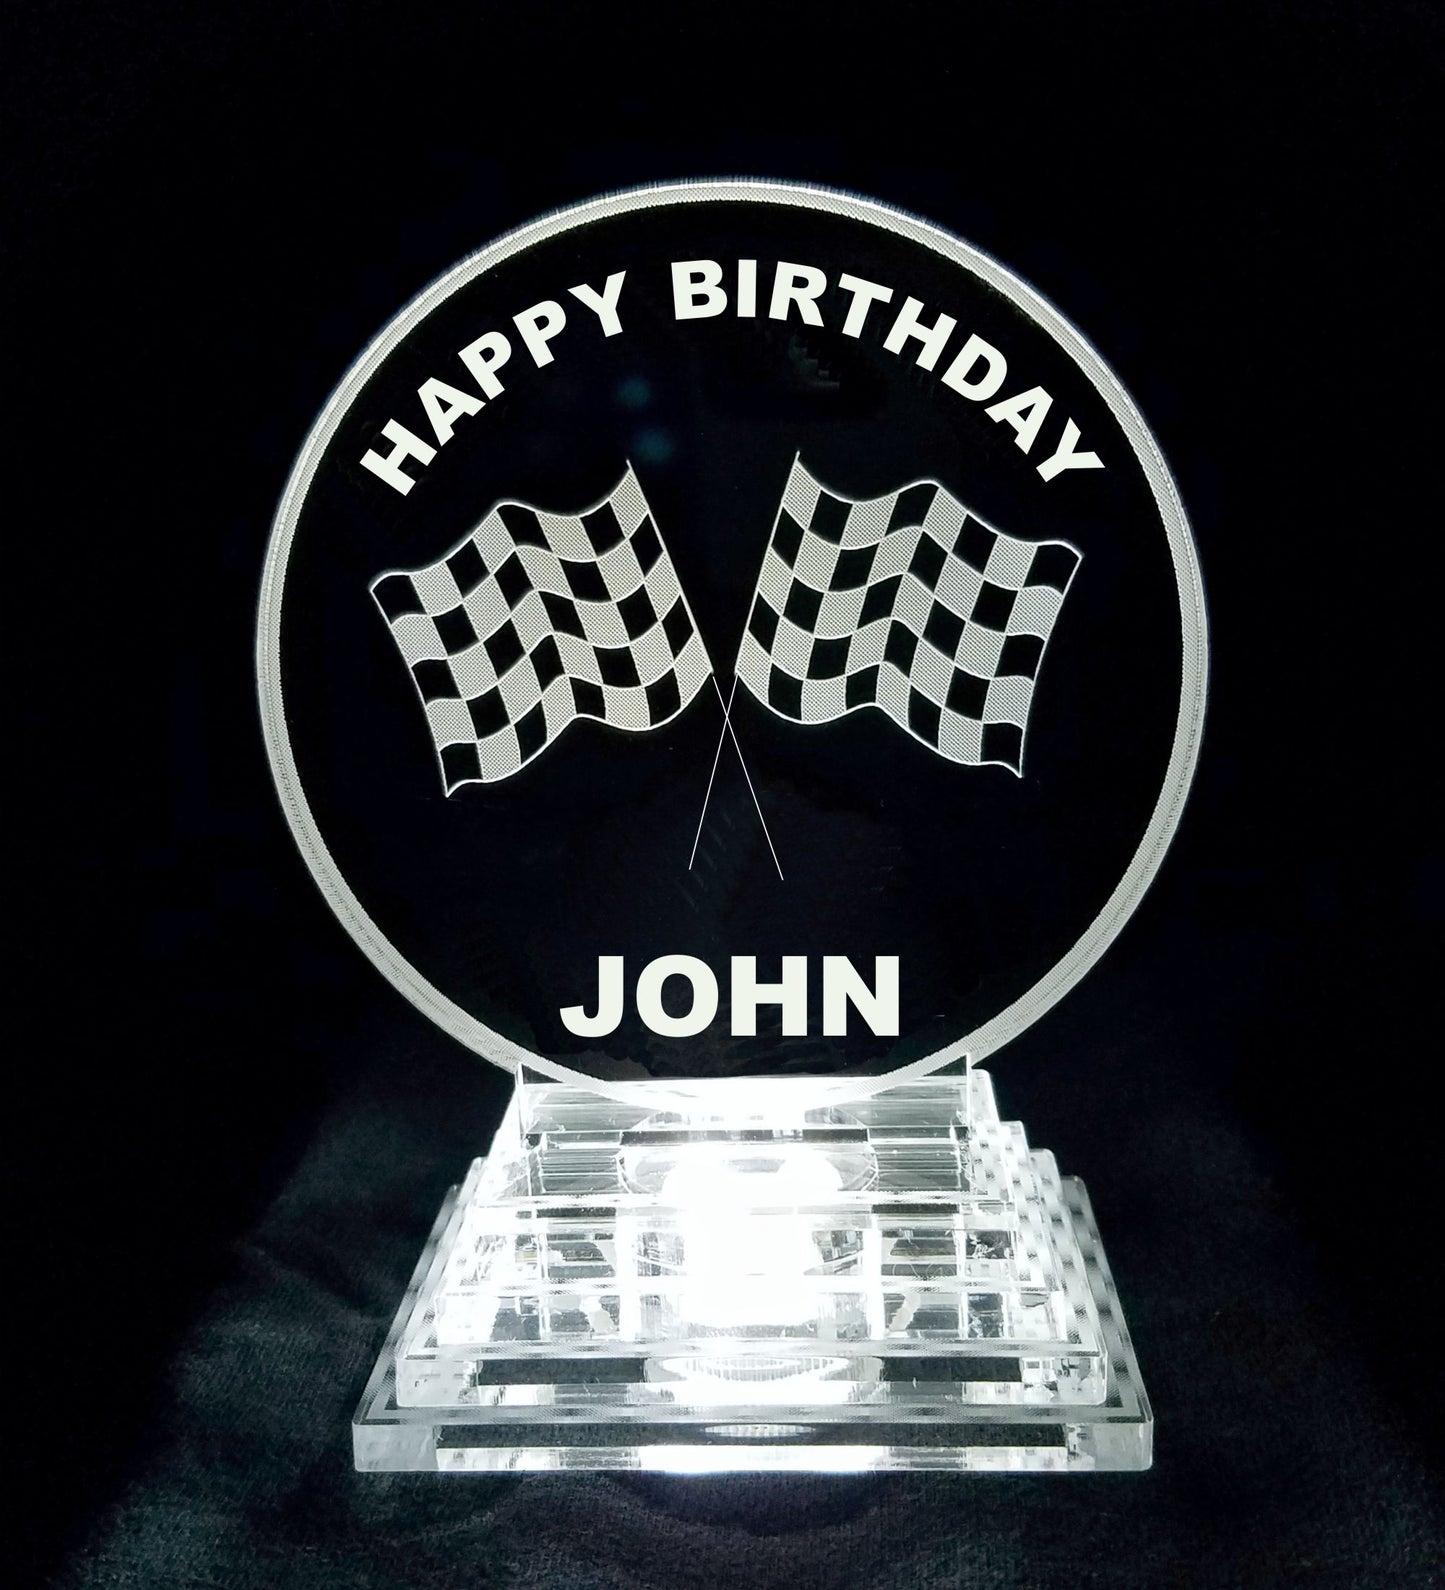 acrylic round cake topper designed with a pair of racing flags, Happy Birthday and a name